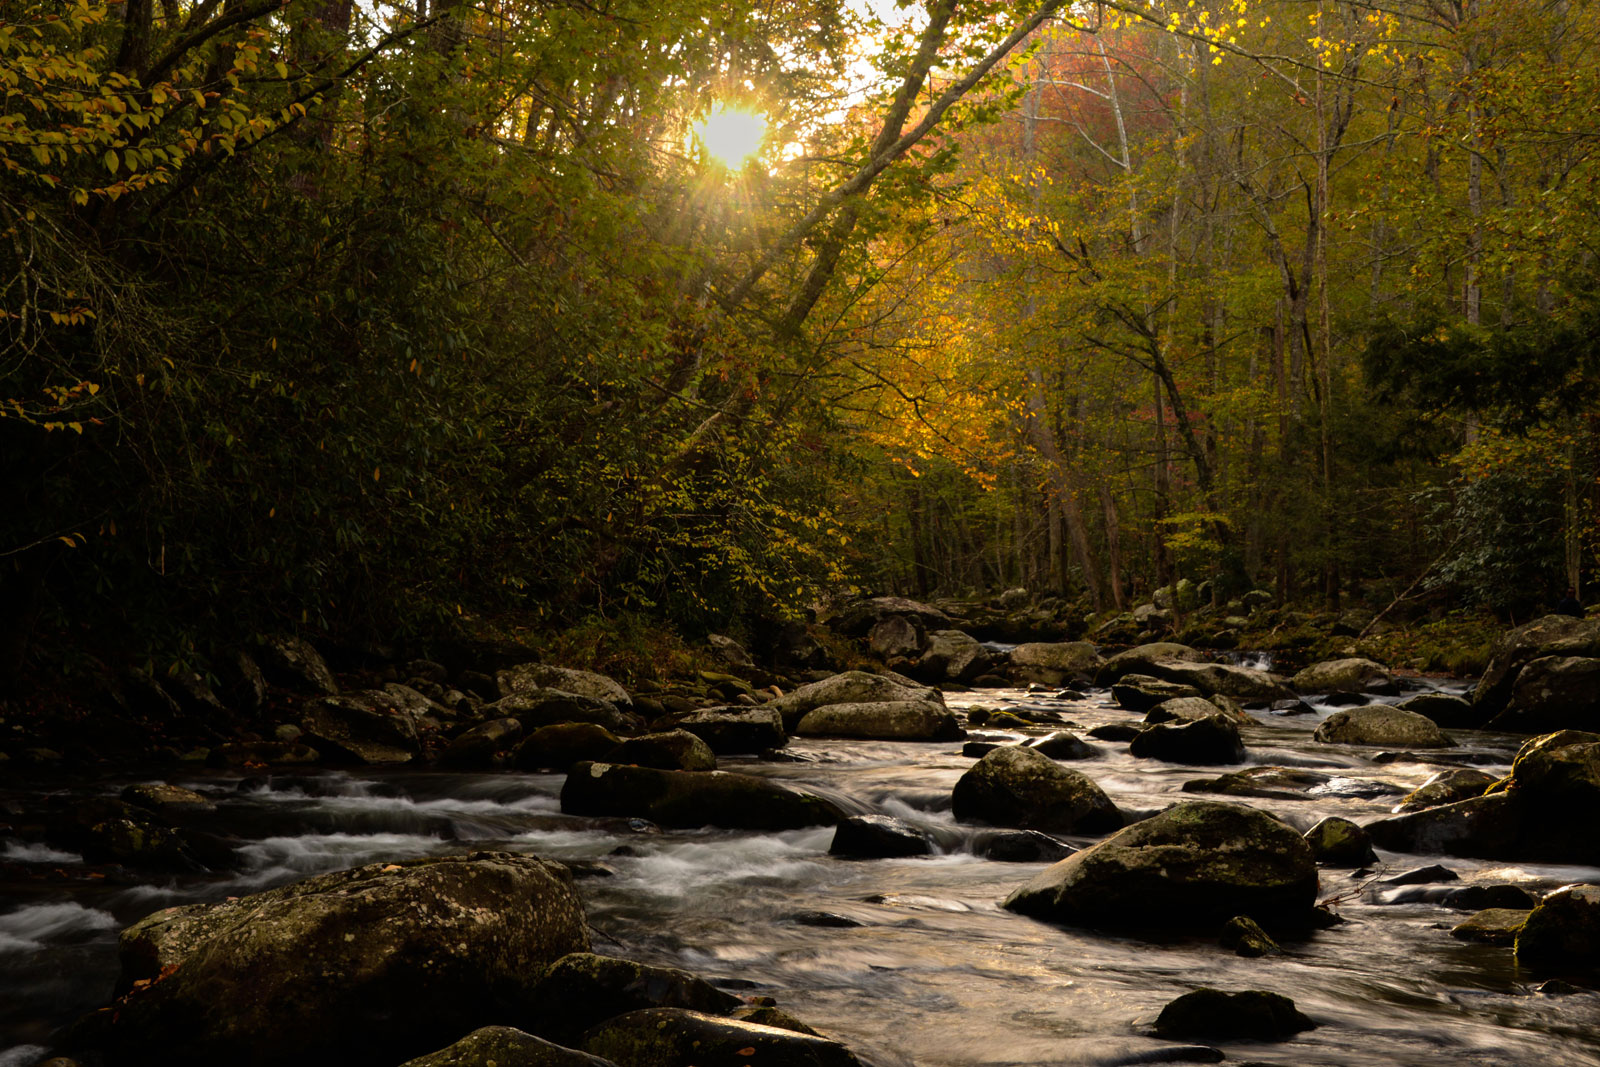 A Smoky Mountain Stream in the Fall